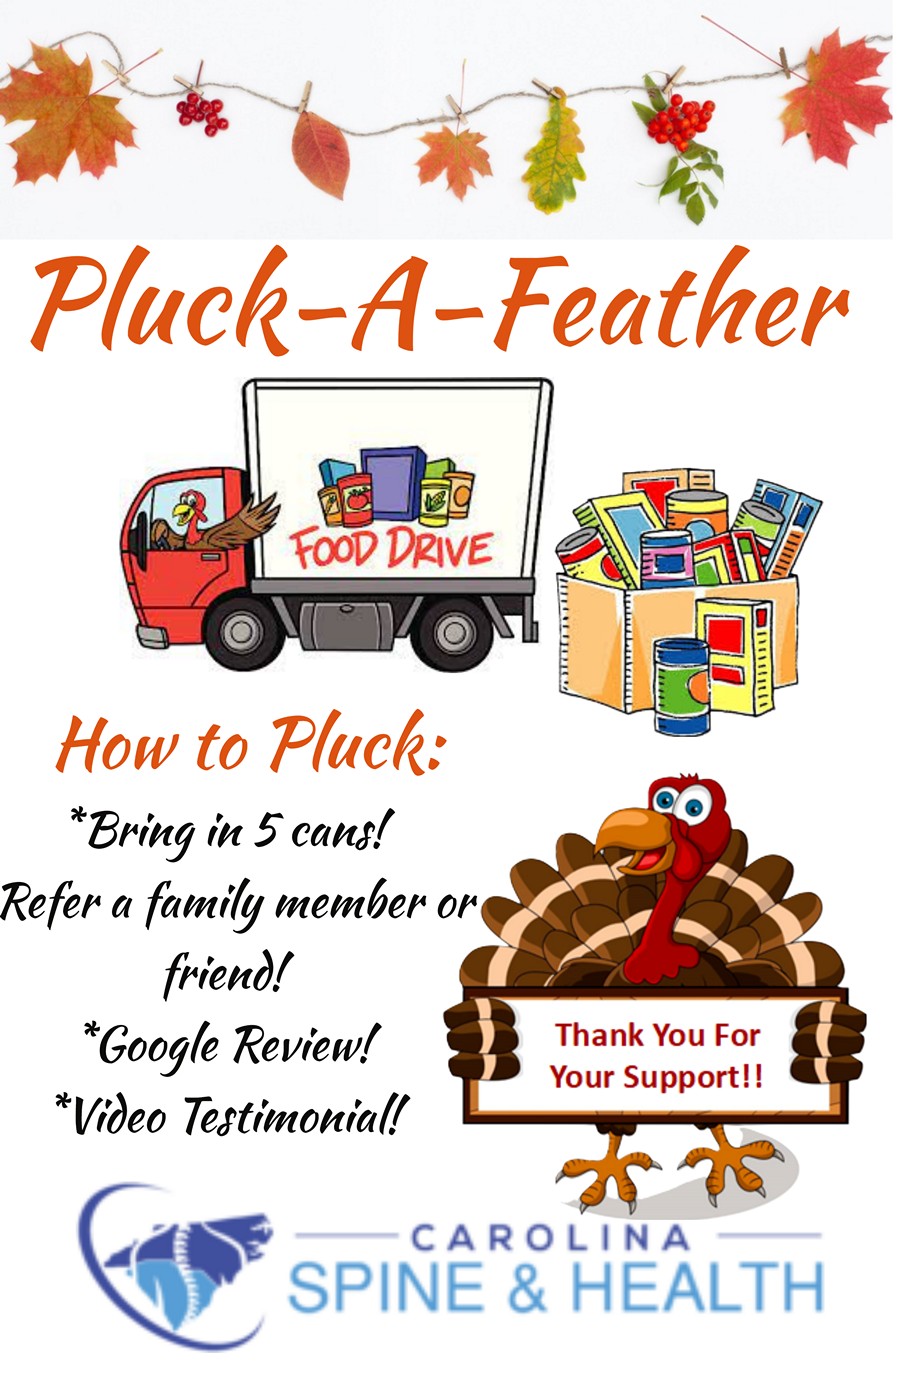 Pluck a Feather Food Drive